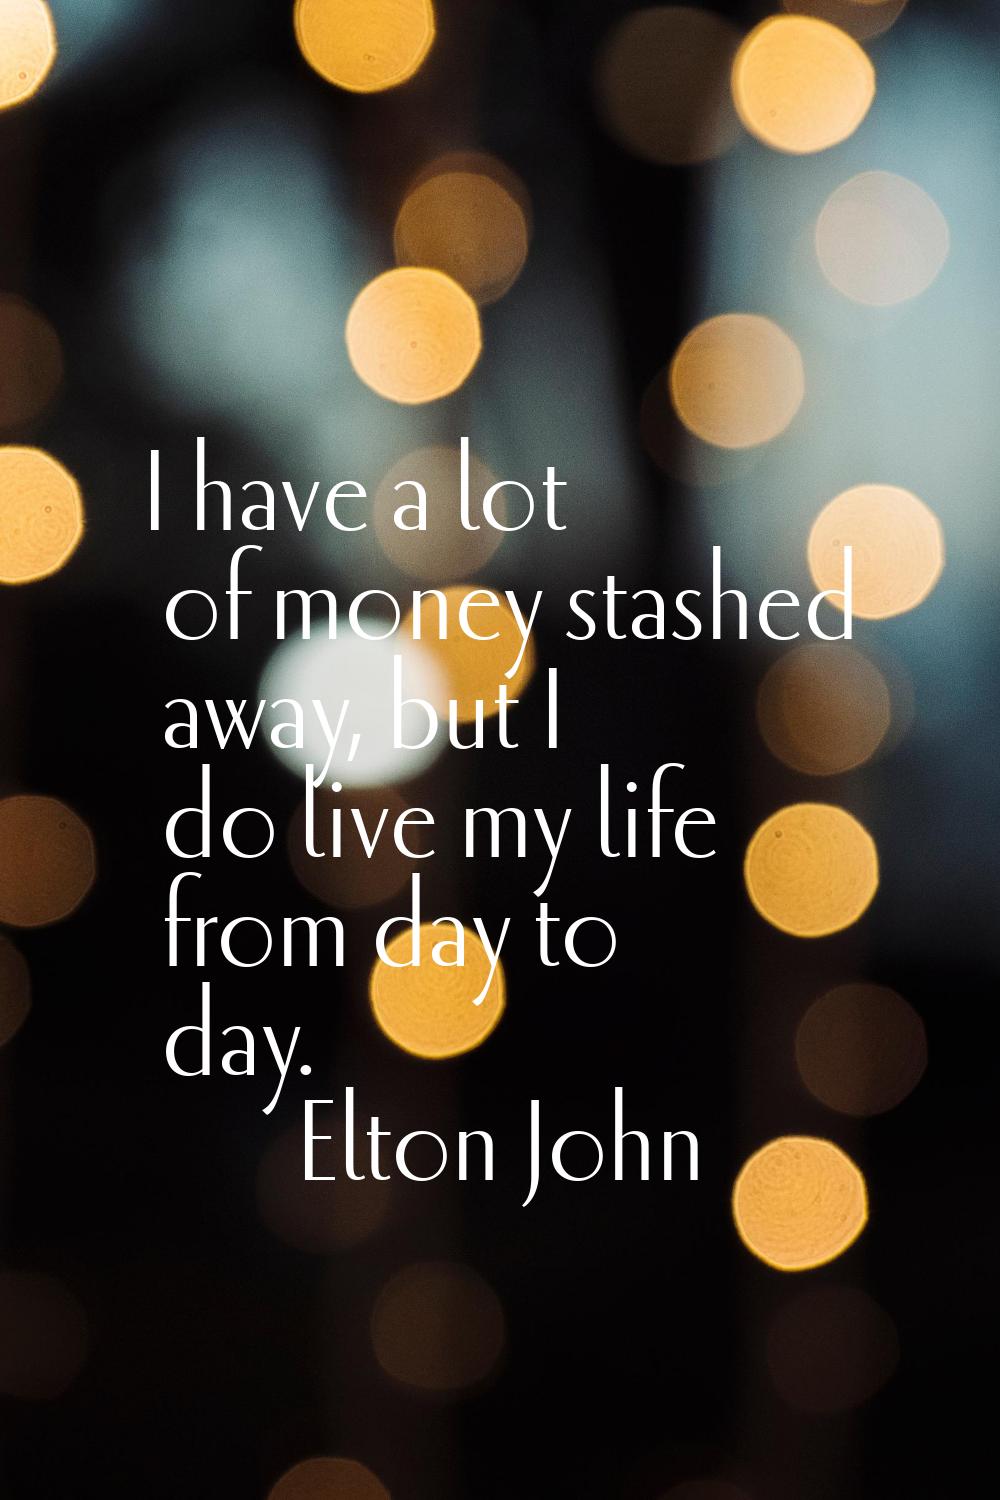 I have a lot of money stashed away, but I do live my life from day to day.